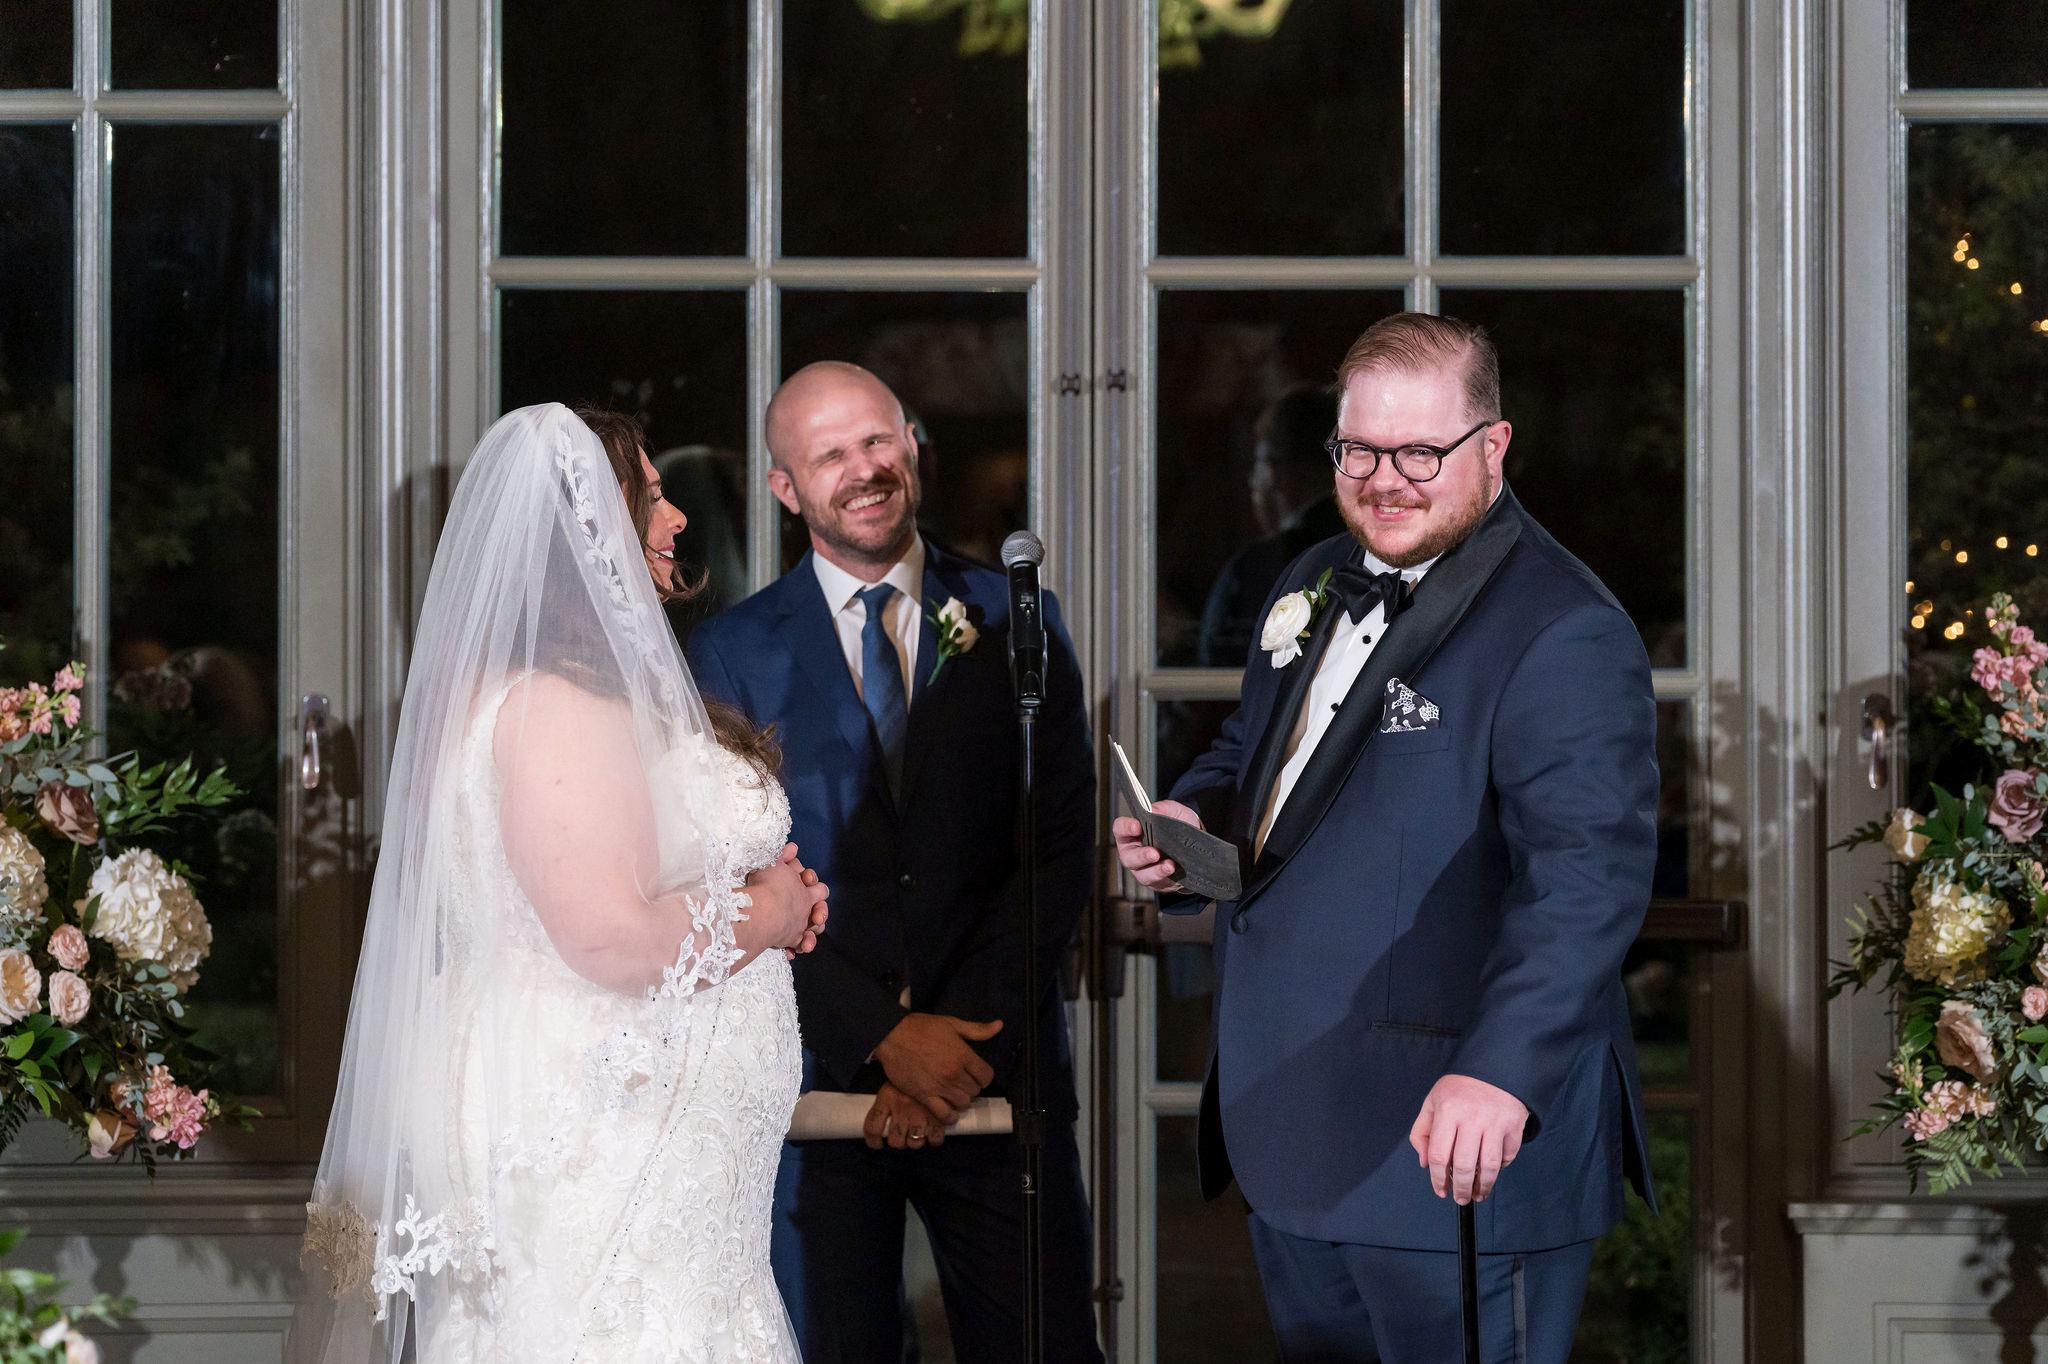 A bride and groom laugh while reading vows at their wedding at the Royal Park Hotel in Rochester, MI.